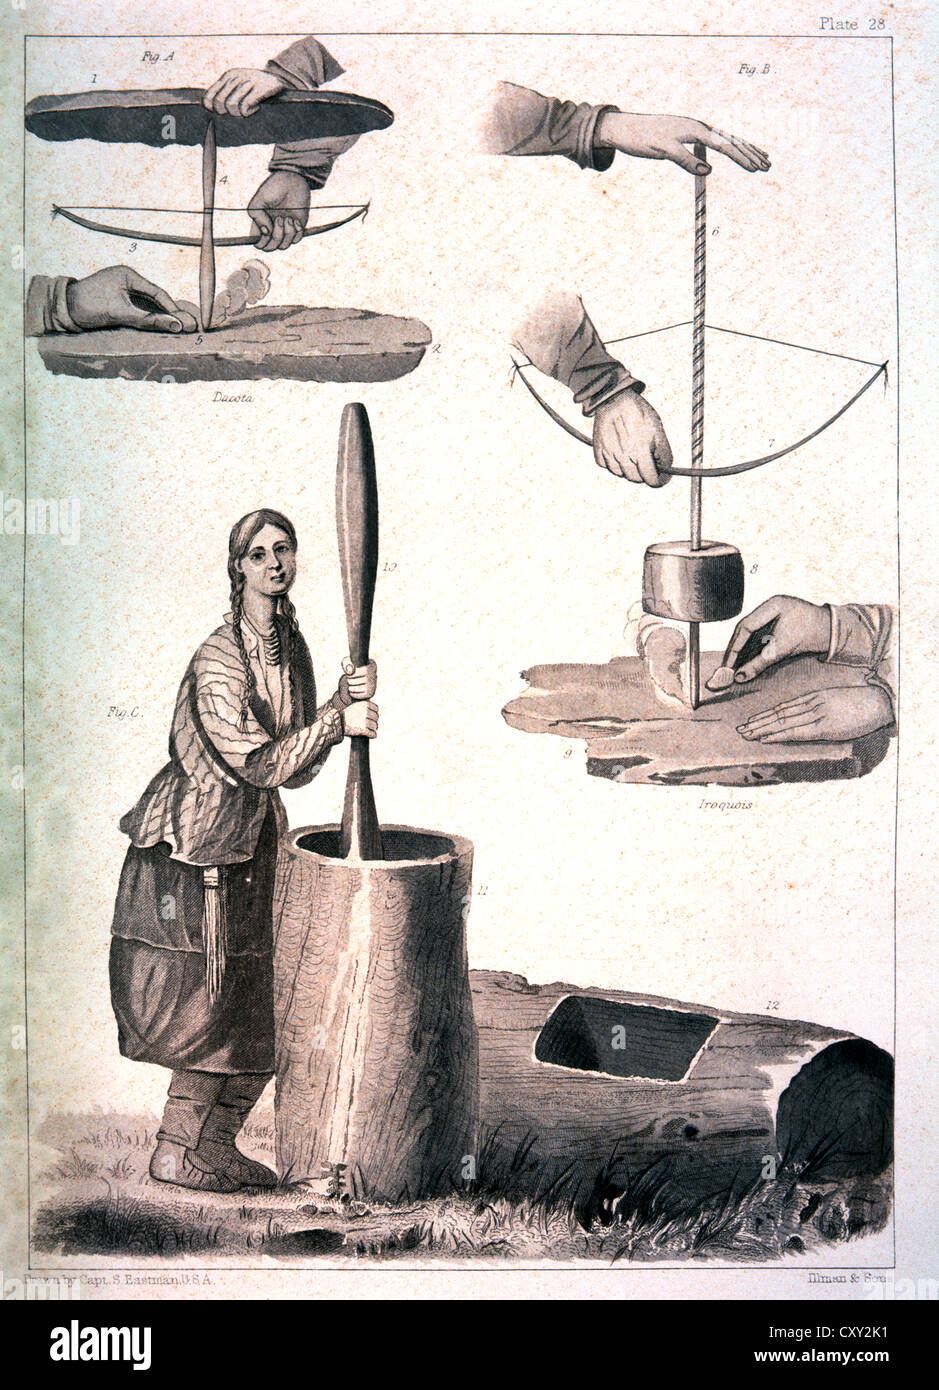 Methods of Starting Fire, Illustration by S. Eastman, 1853 Stock Photo